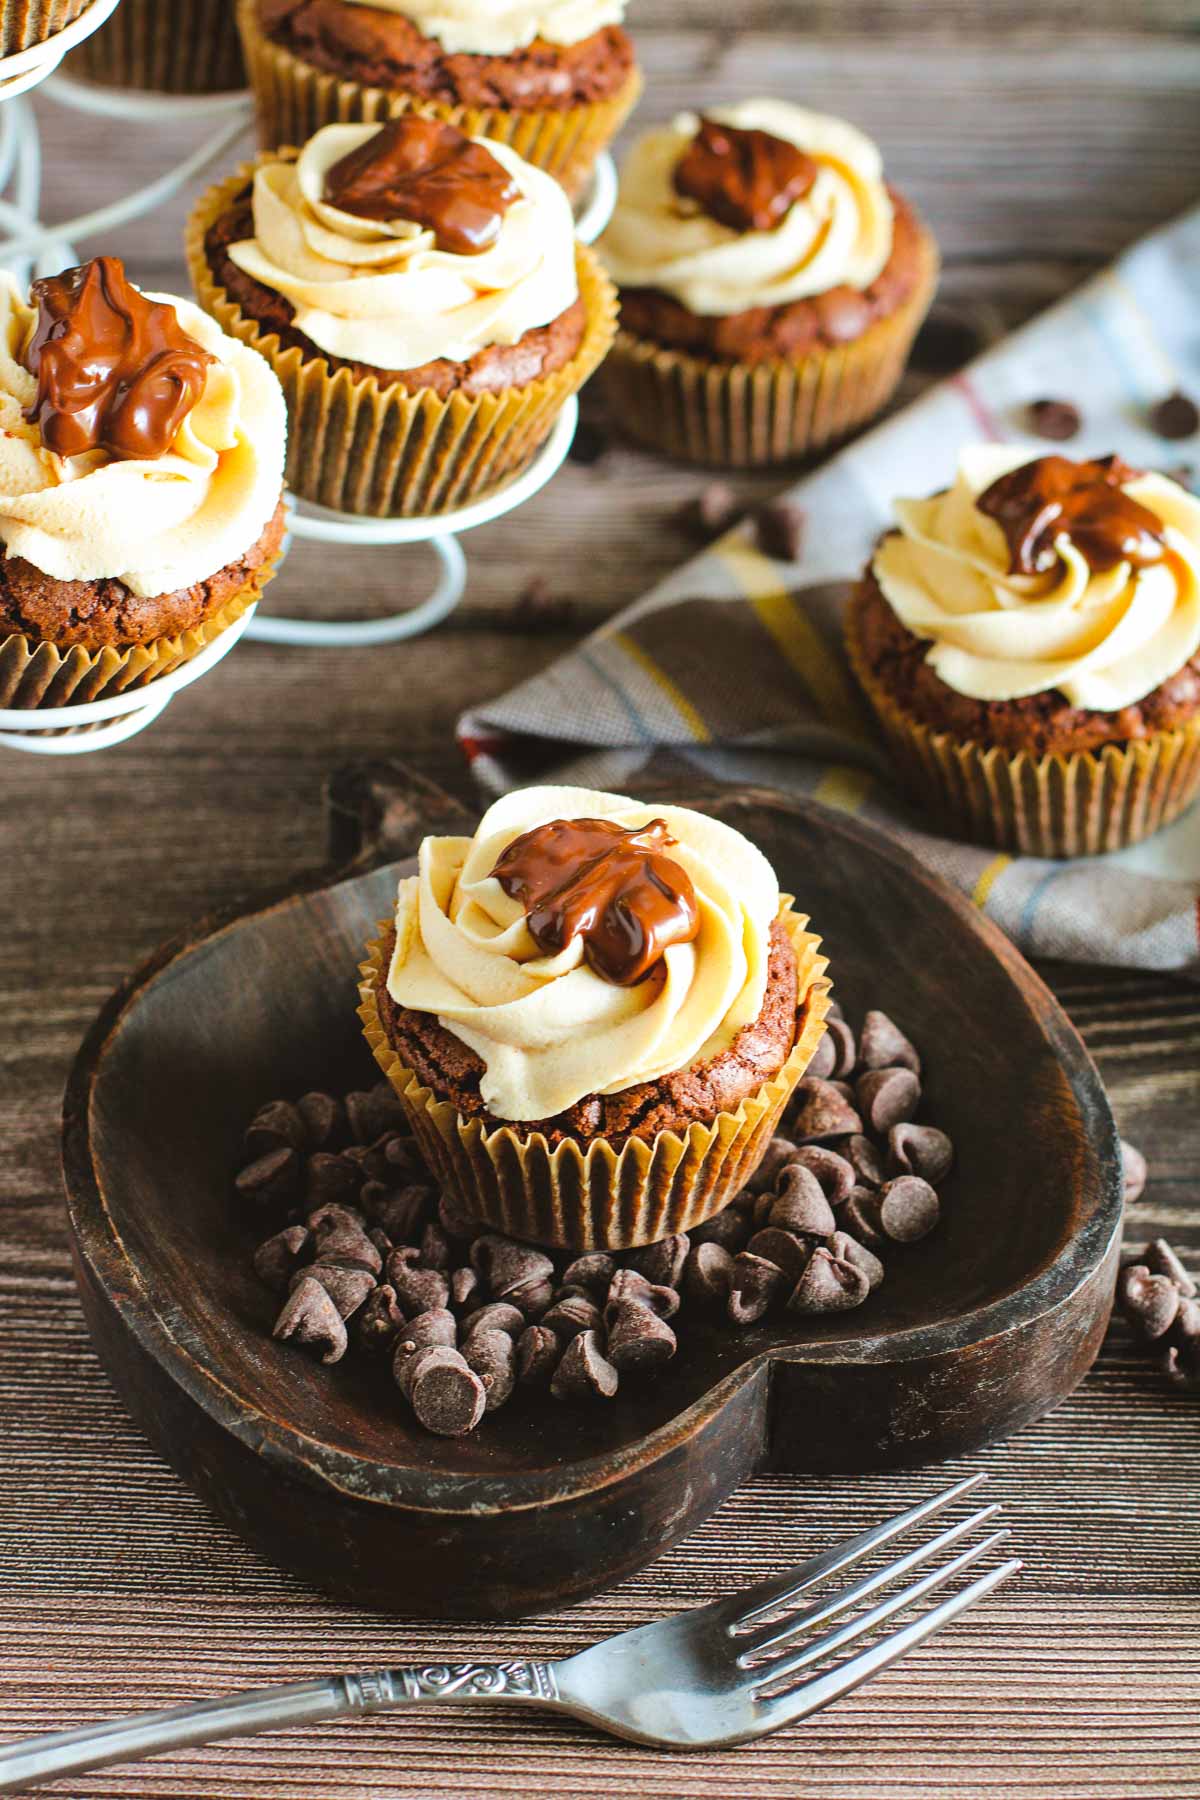 A chocolate brownie buckeye cupcake frosted with peanut butter frosting and a dollop of chocolate. It's sitting on a dark wood pumpkin-shaped platter.